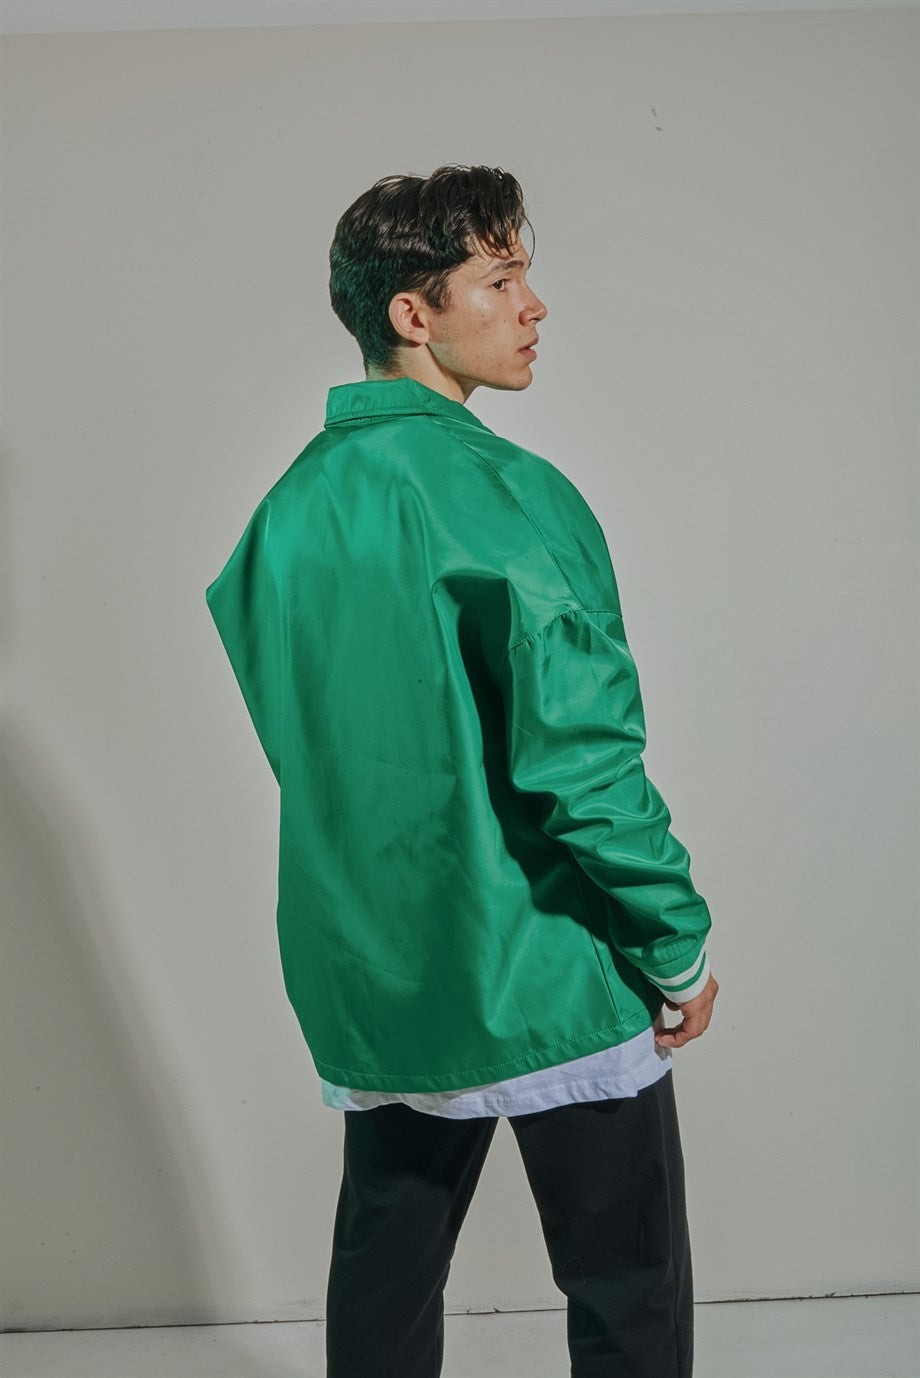 GIACCA OVERSIZE J COLLECTION COLORE VERDE